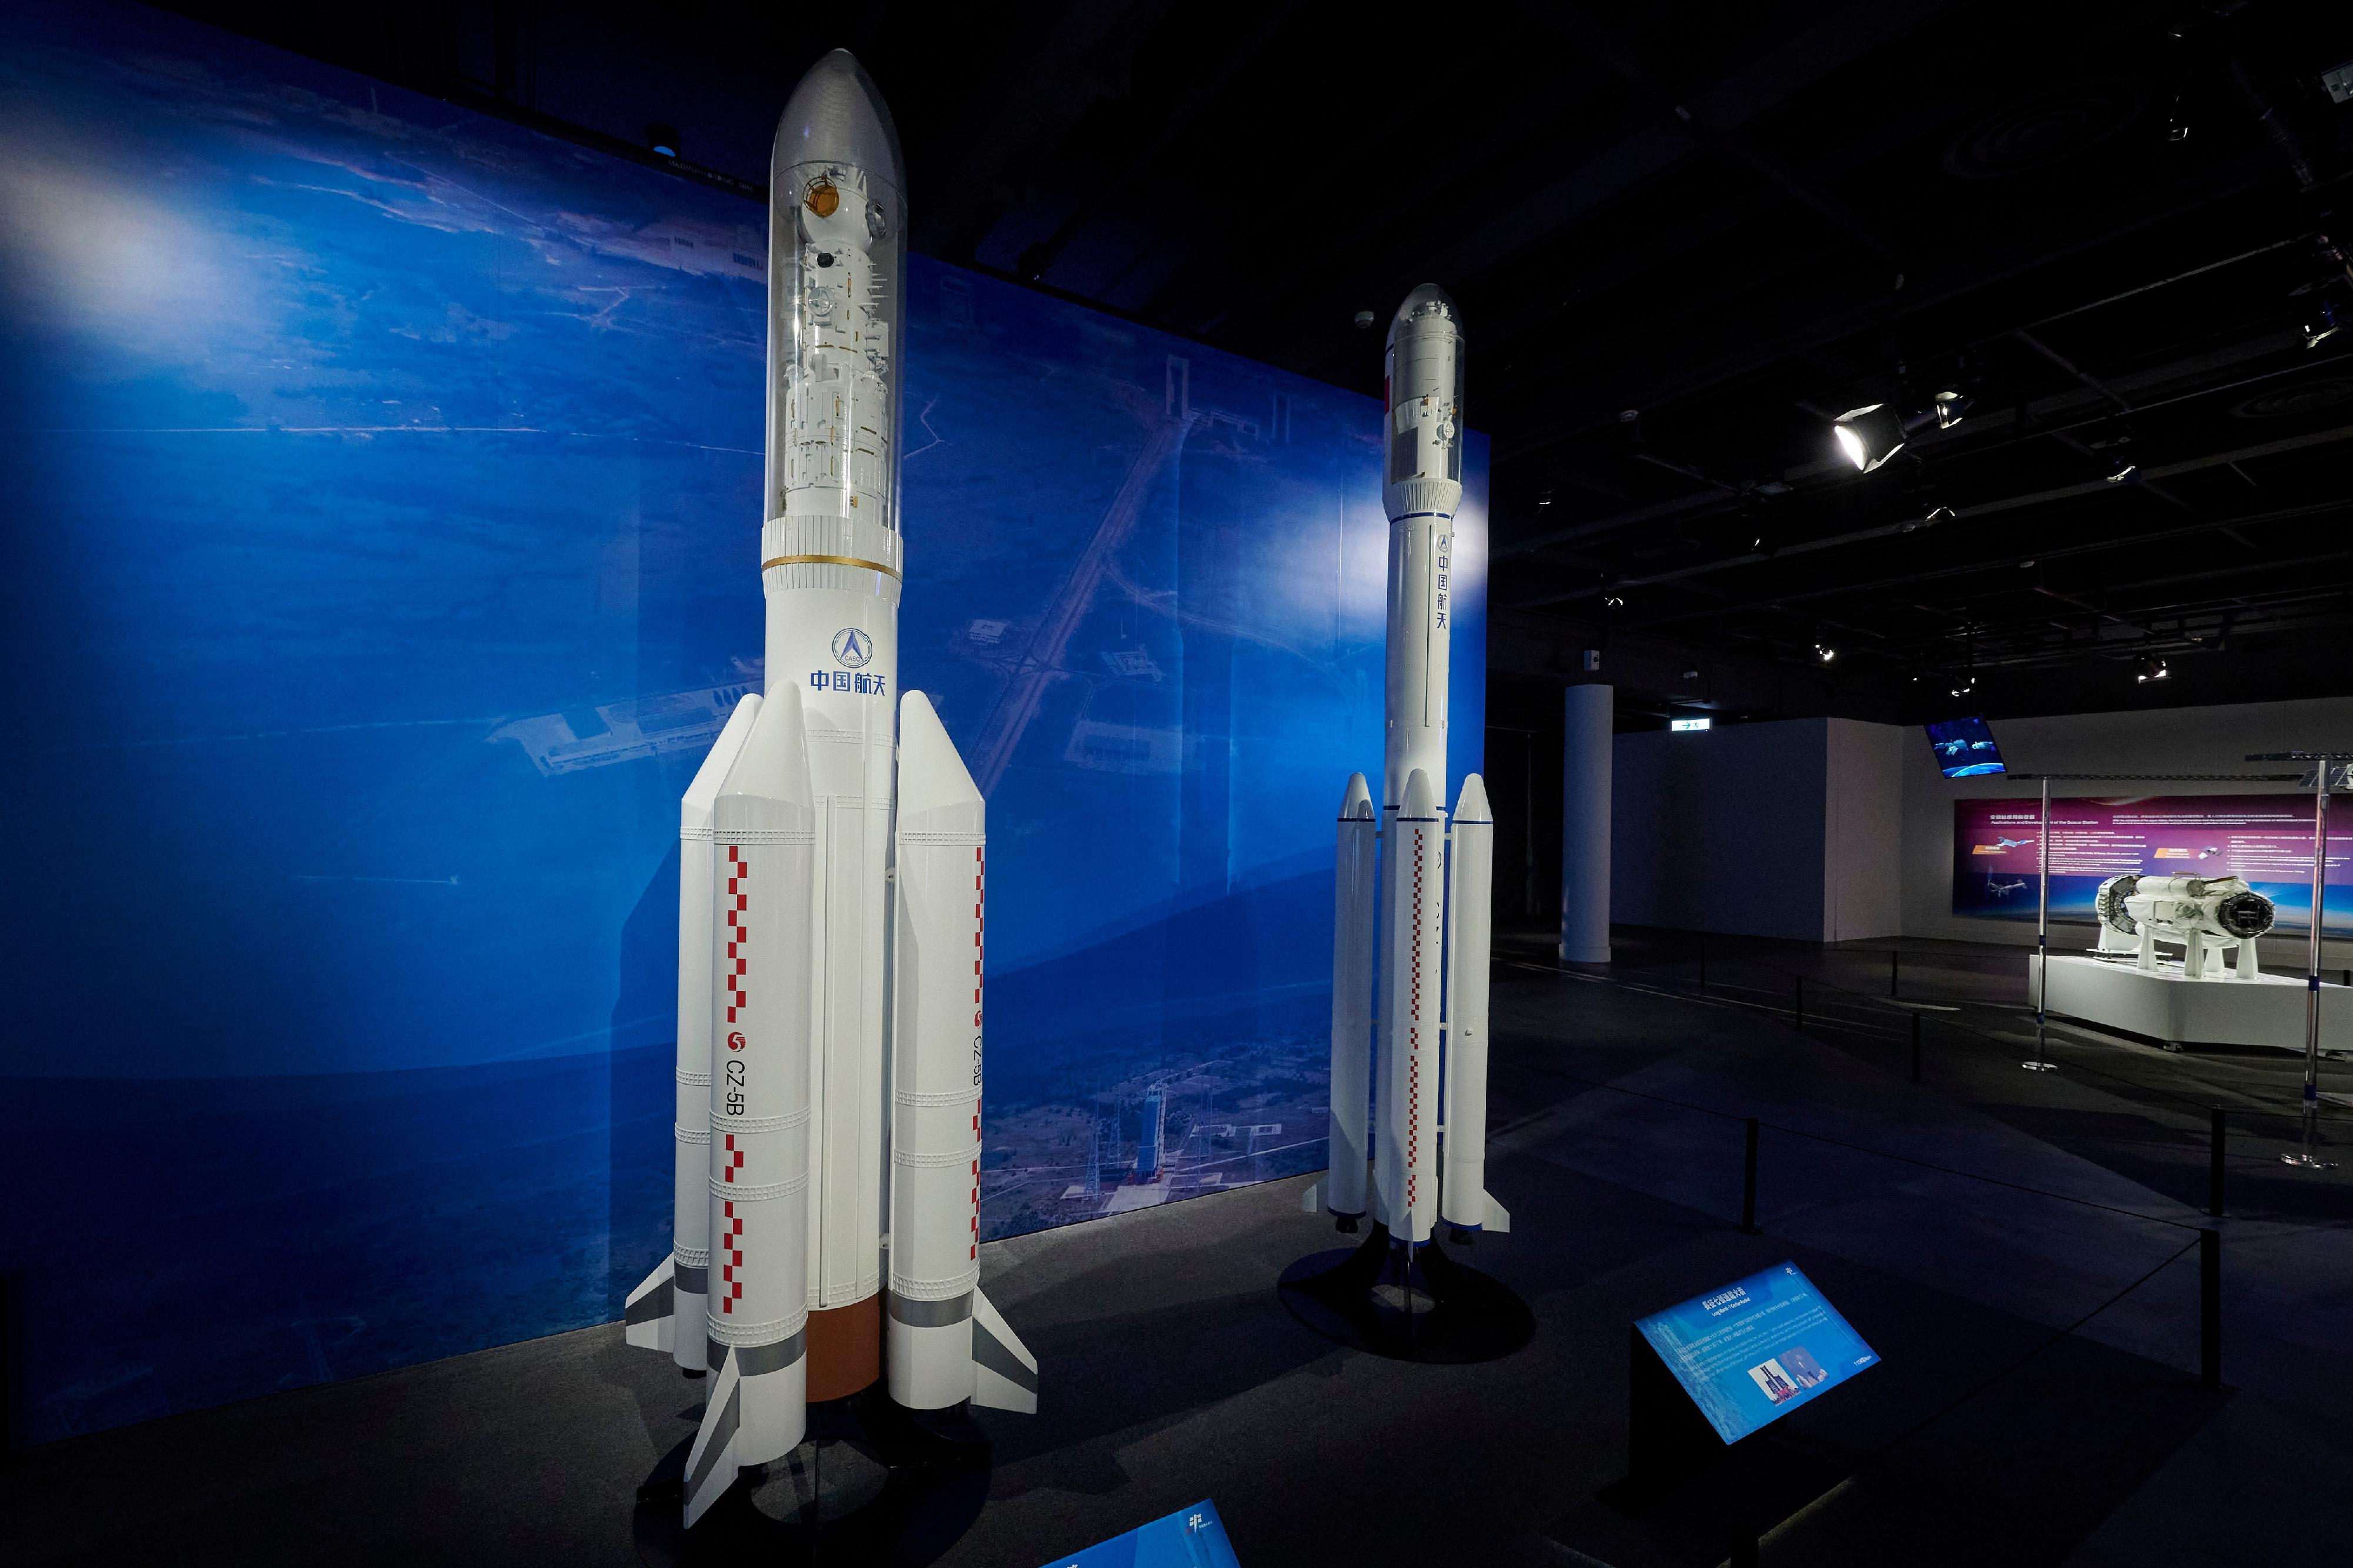 The China Manned Space Exhibition will be held from tomorrow (December 1) to February 18 next year at the Hong Kong Science Museum and the Hong Kong Museum of History. Photo shows 1:15 models of (from left) the Long March-5B carrier rocket with Tianhe core module onboard and the Long March-7 carrier rocket with Tianzhou cargo spacecraft onboard.